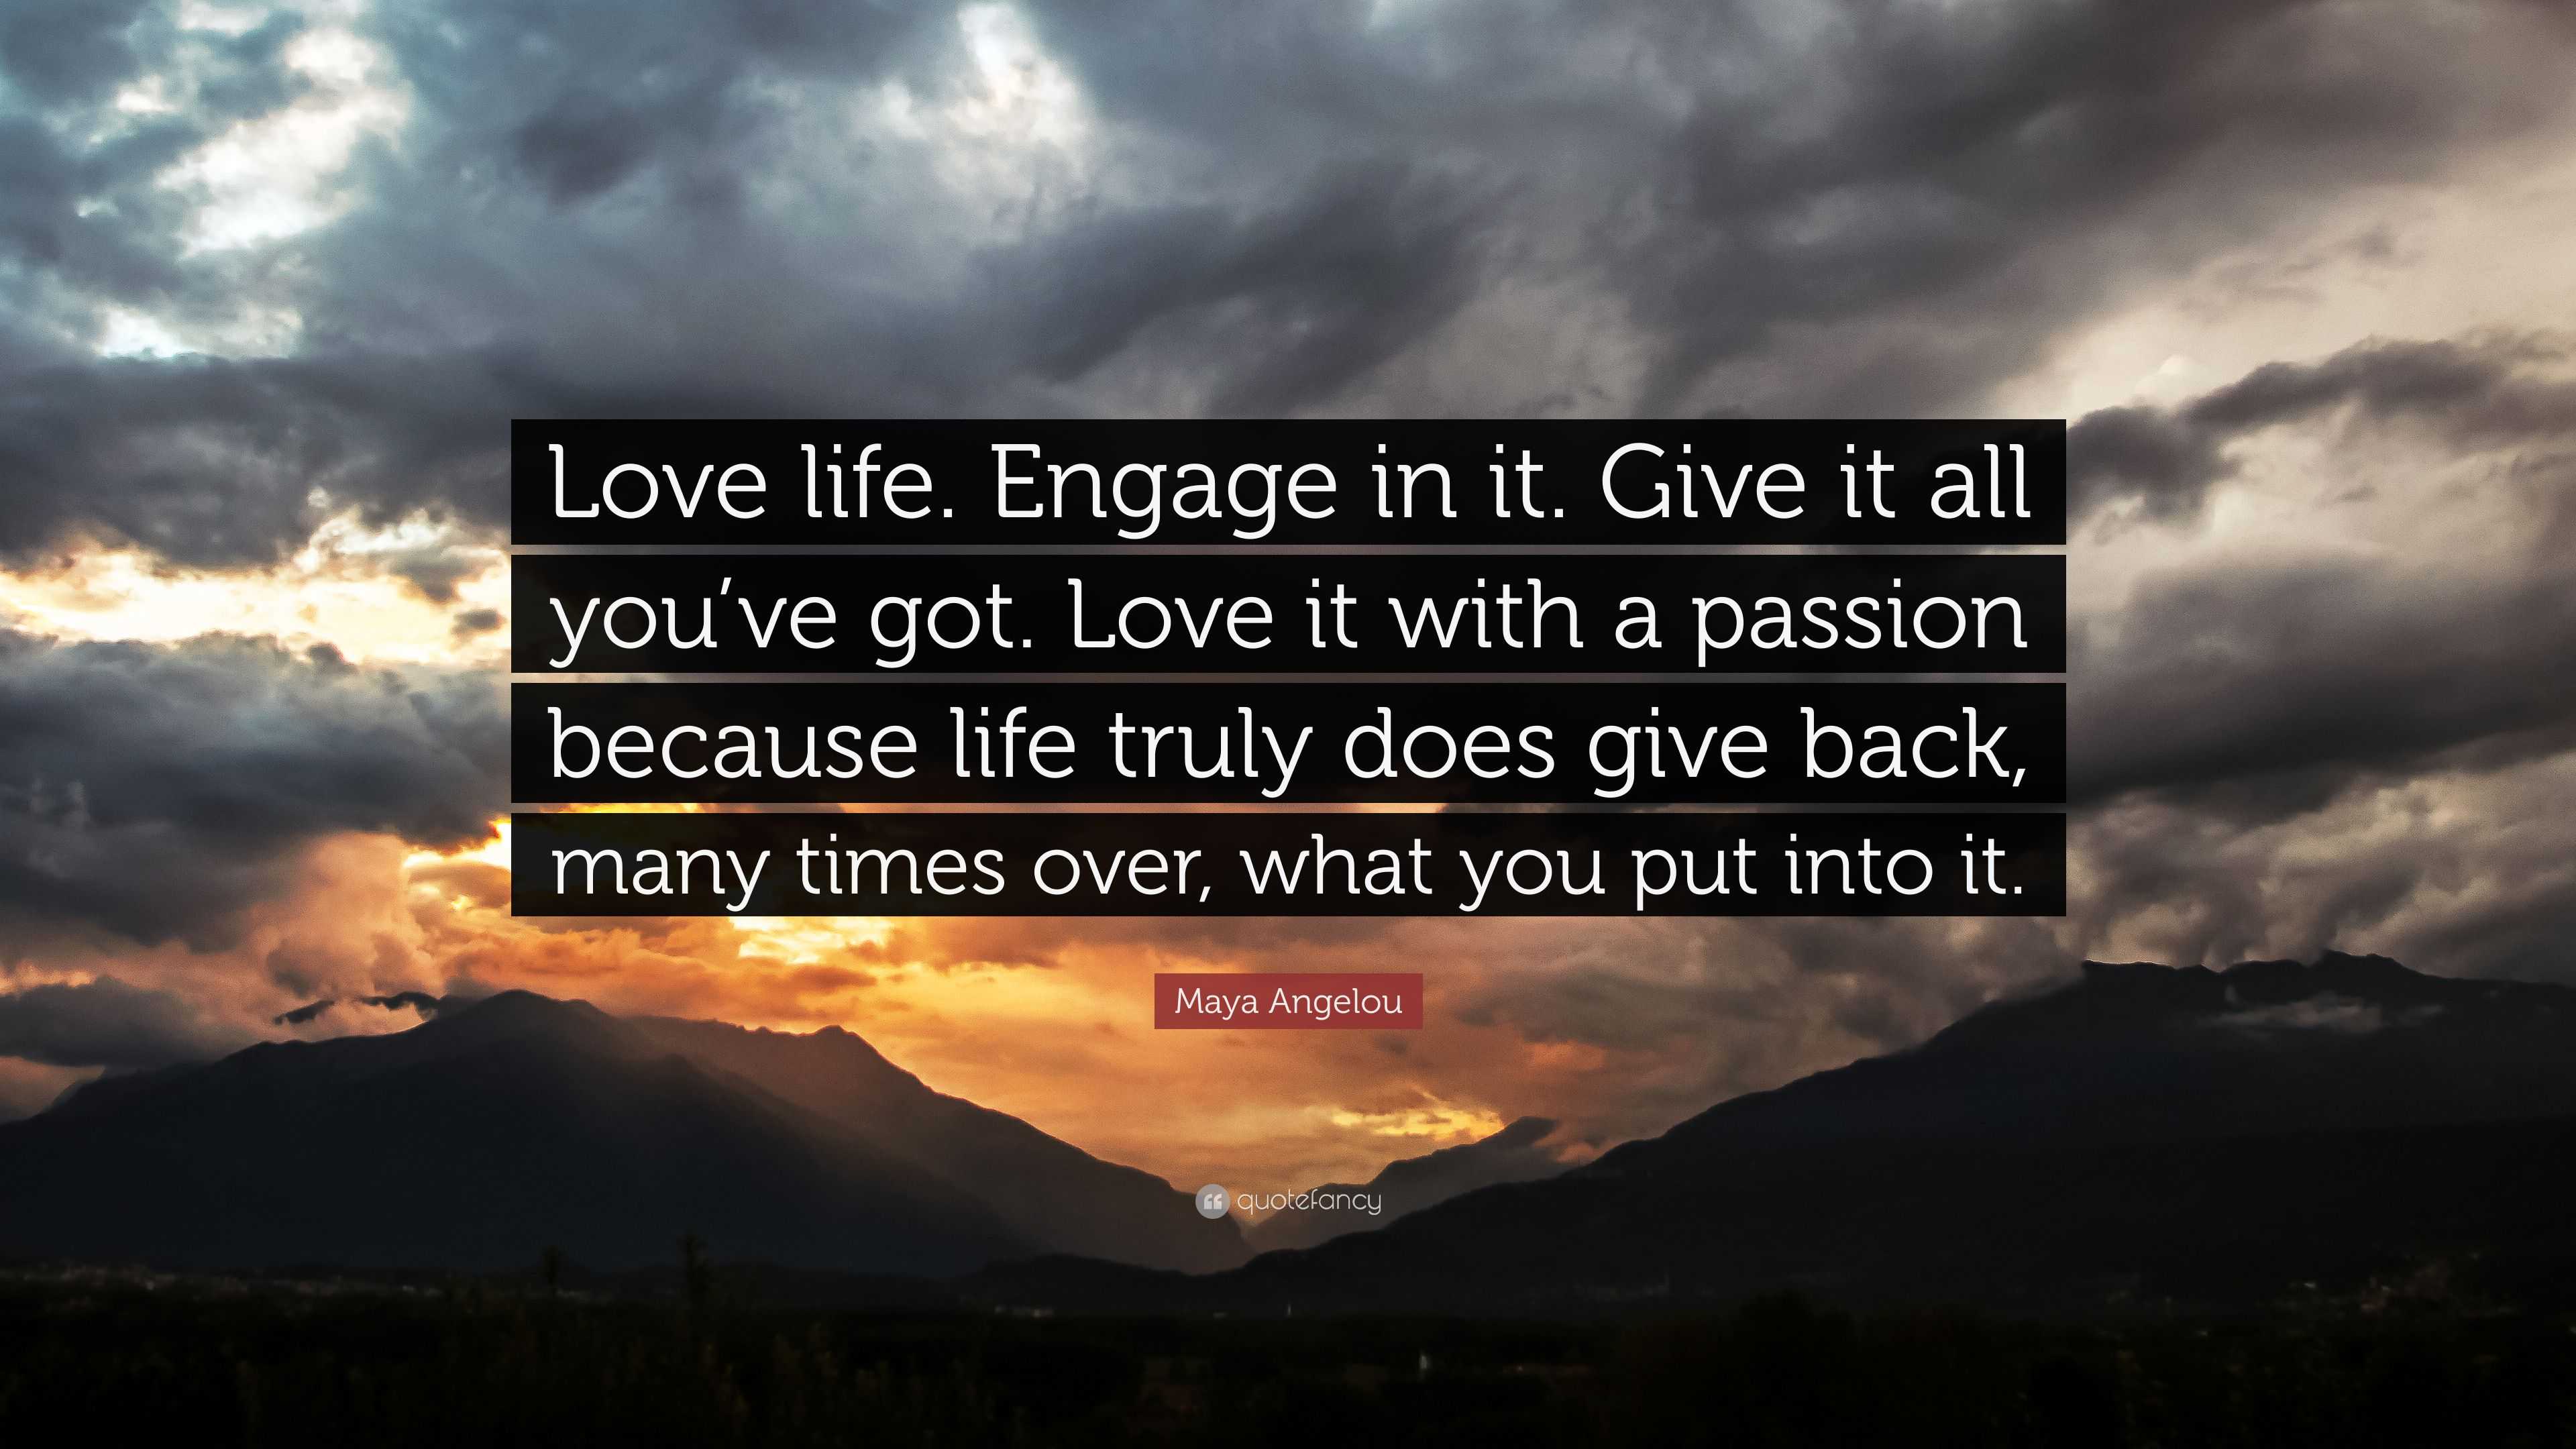 Maya Angelou Quote “Love life. Engage in it. Give it all you’ve got